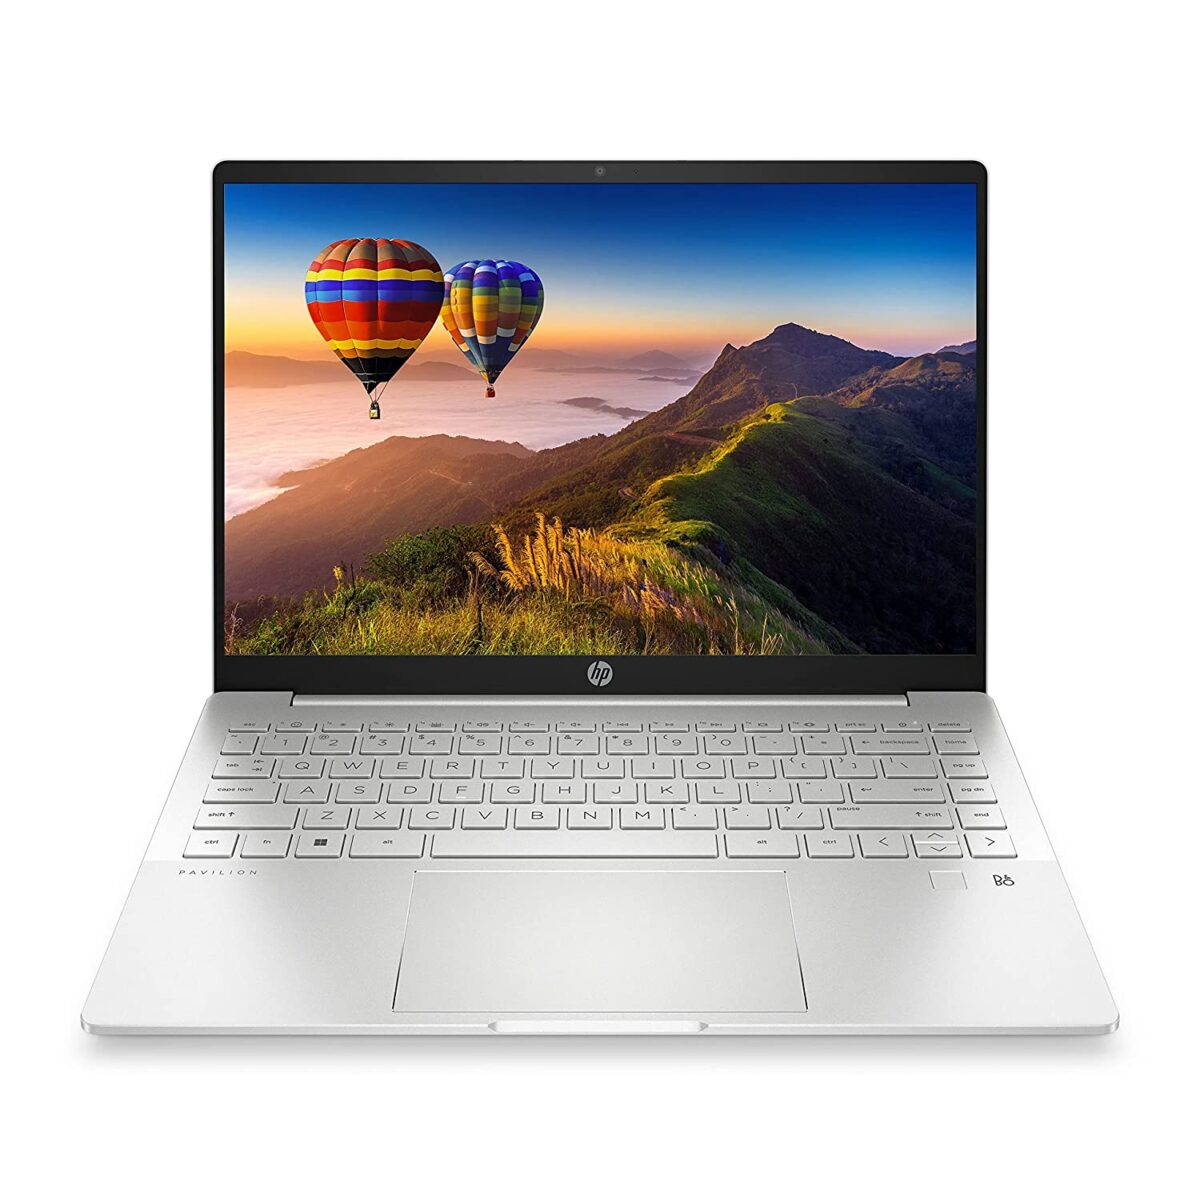 HP 14-eh0021TU Pavilion Plus Laptop Launched in India ( 12th Gen Intel Core i5-12500H / 16GB ram / 512GB SSD )